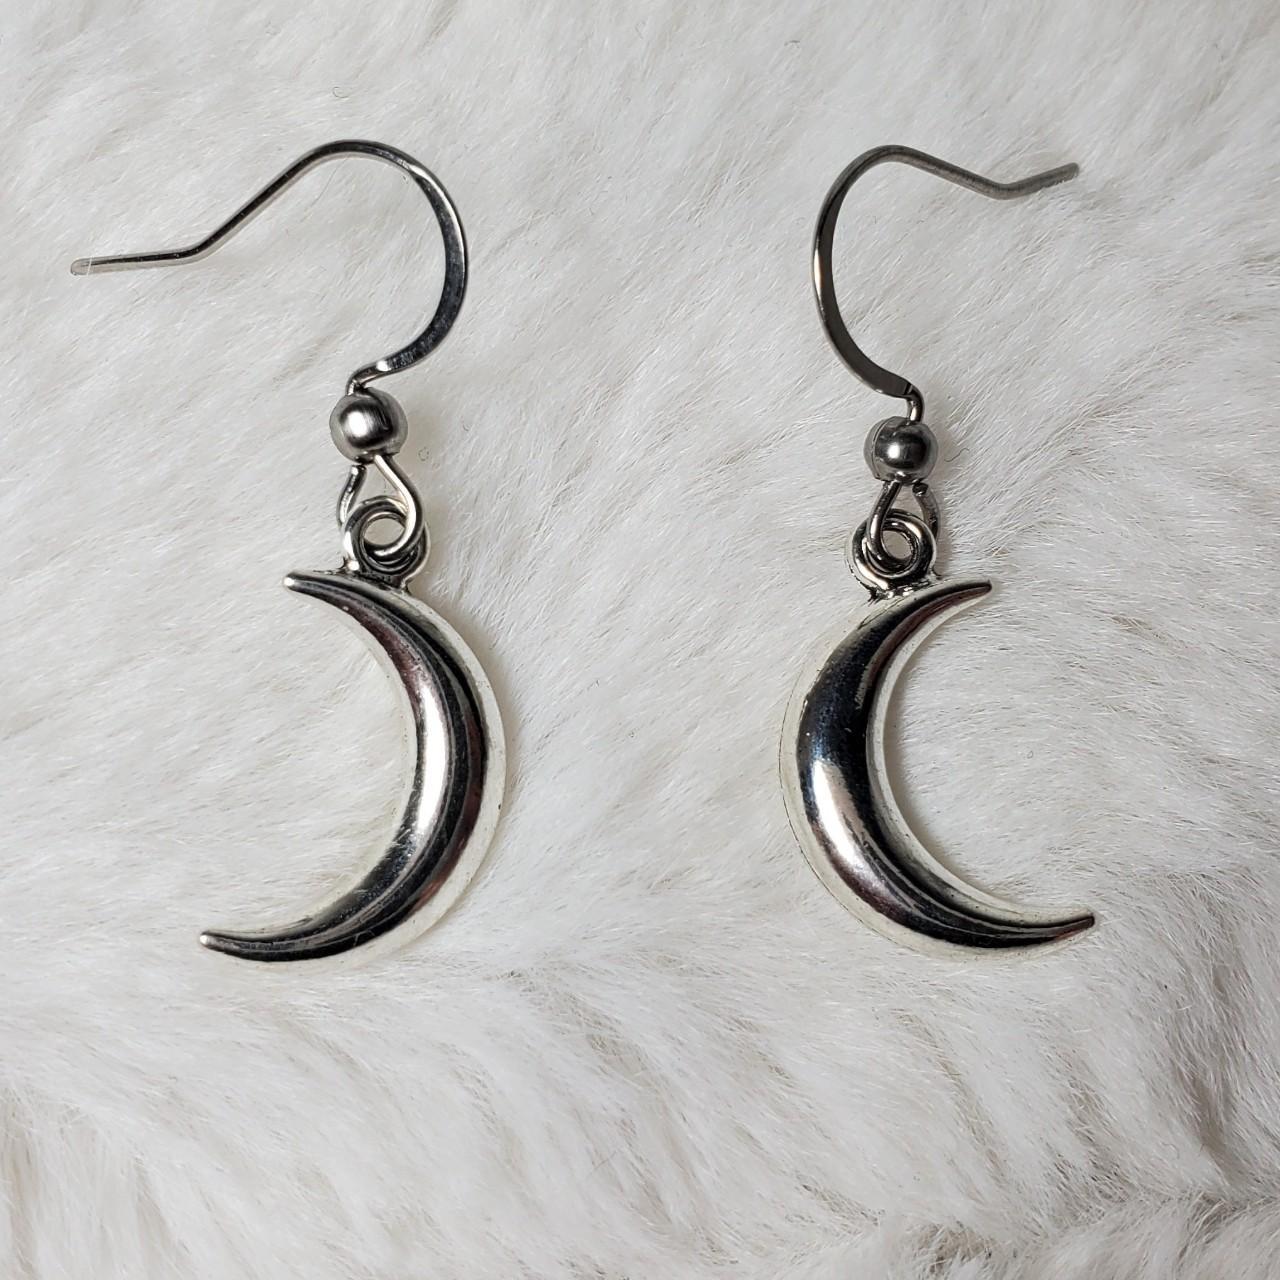 Product Image 3 - Crescent moon earrings. 

These charms